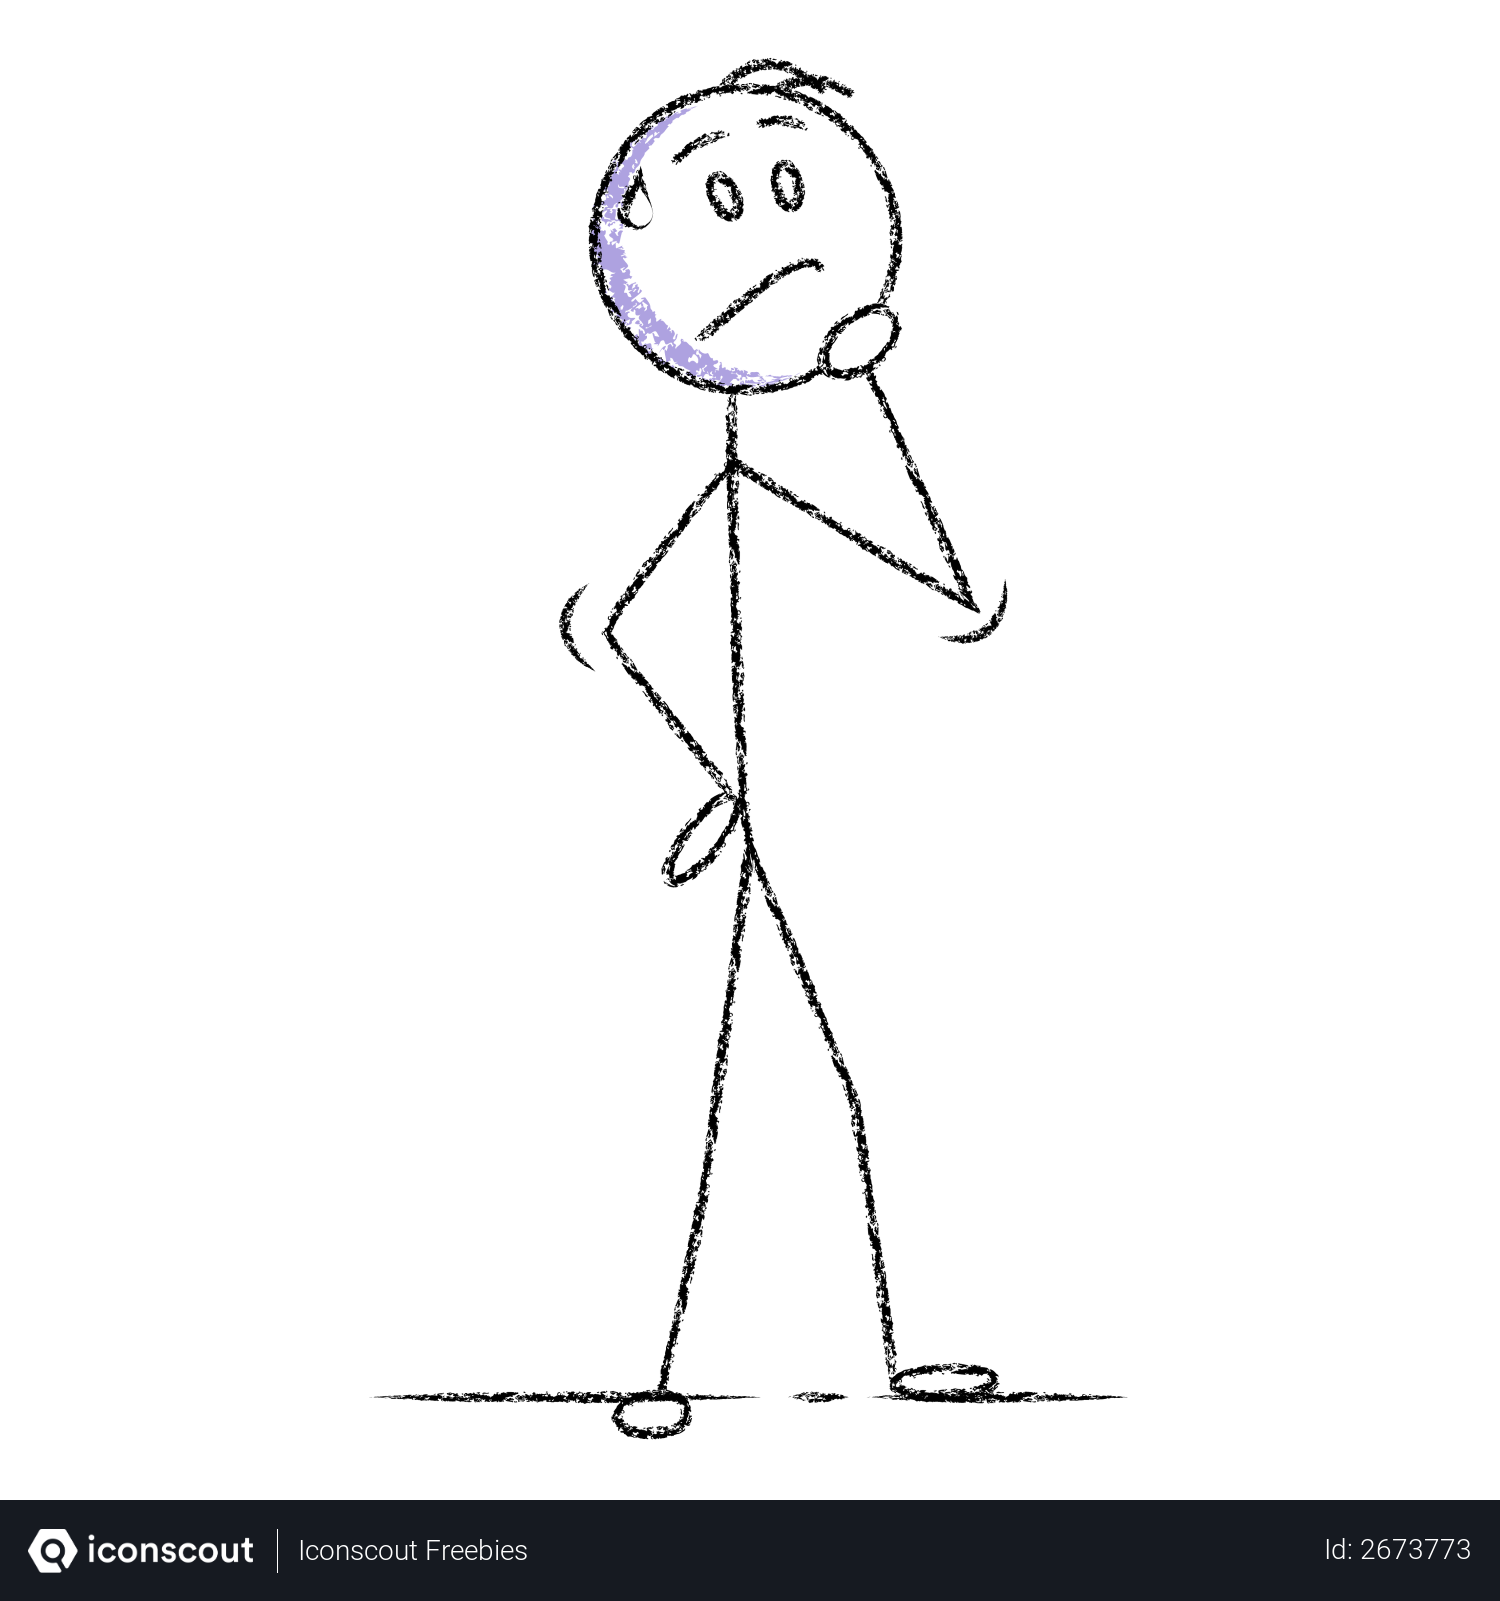 how to create the best stick figure animation